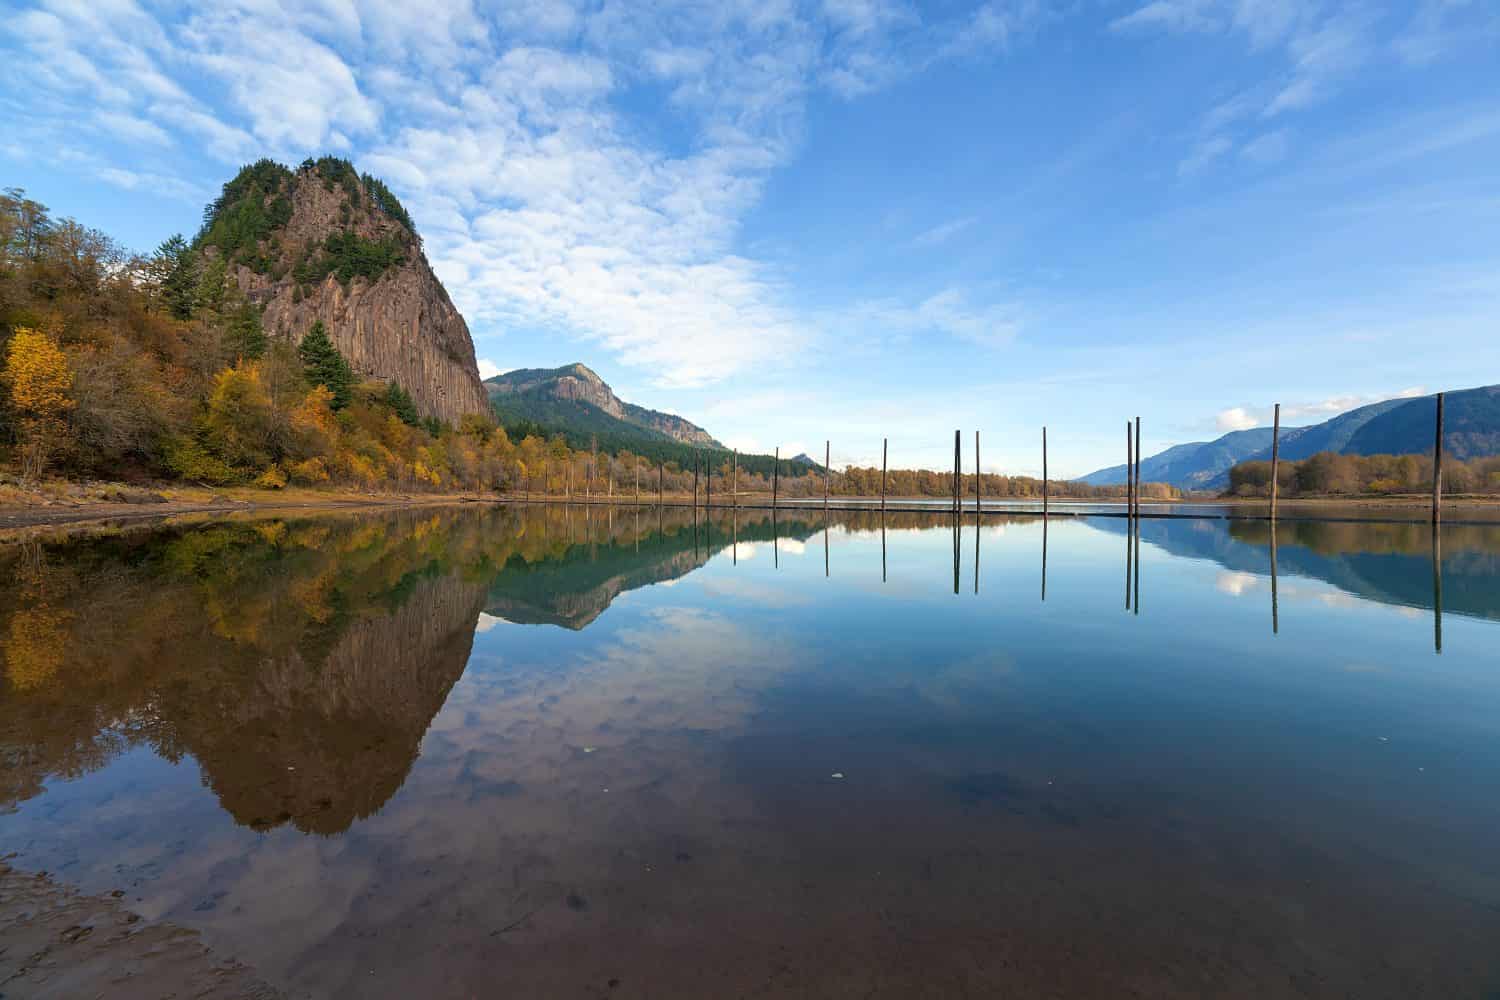 Beacon Rock State Park in Washington State Reflected in the Water of Columbia River Gorge in Fall Season